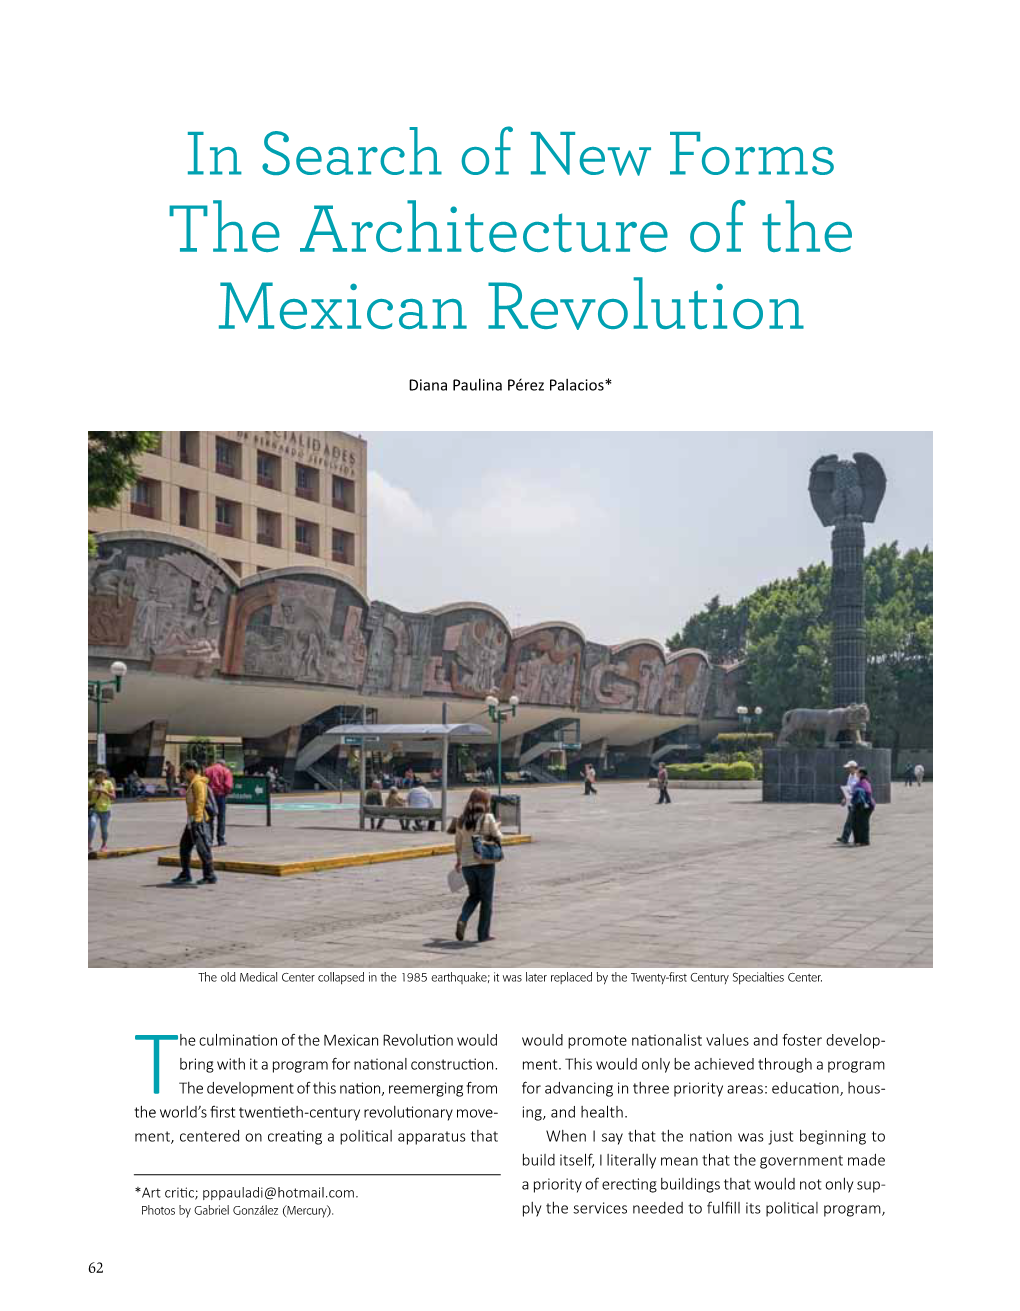 The Architecture of the Mexican Revolution